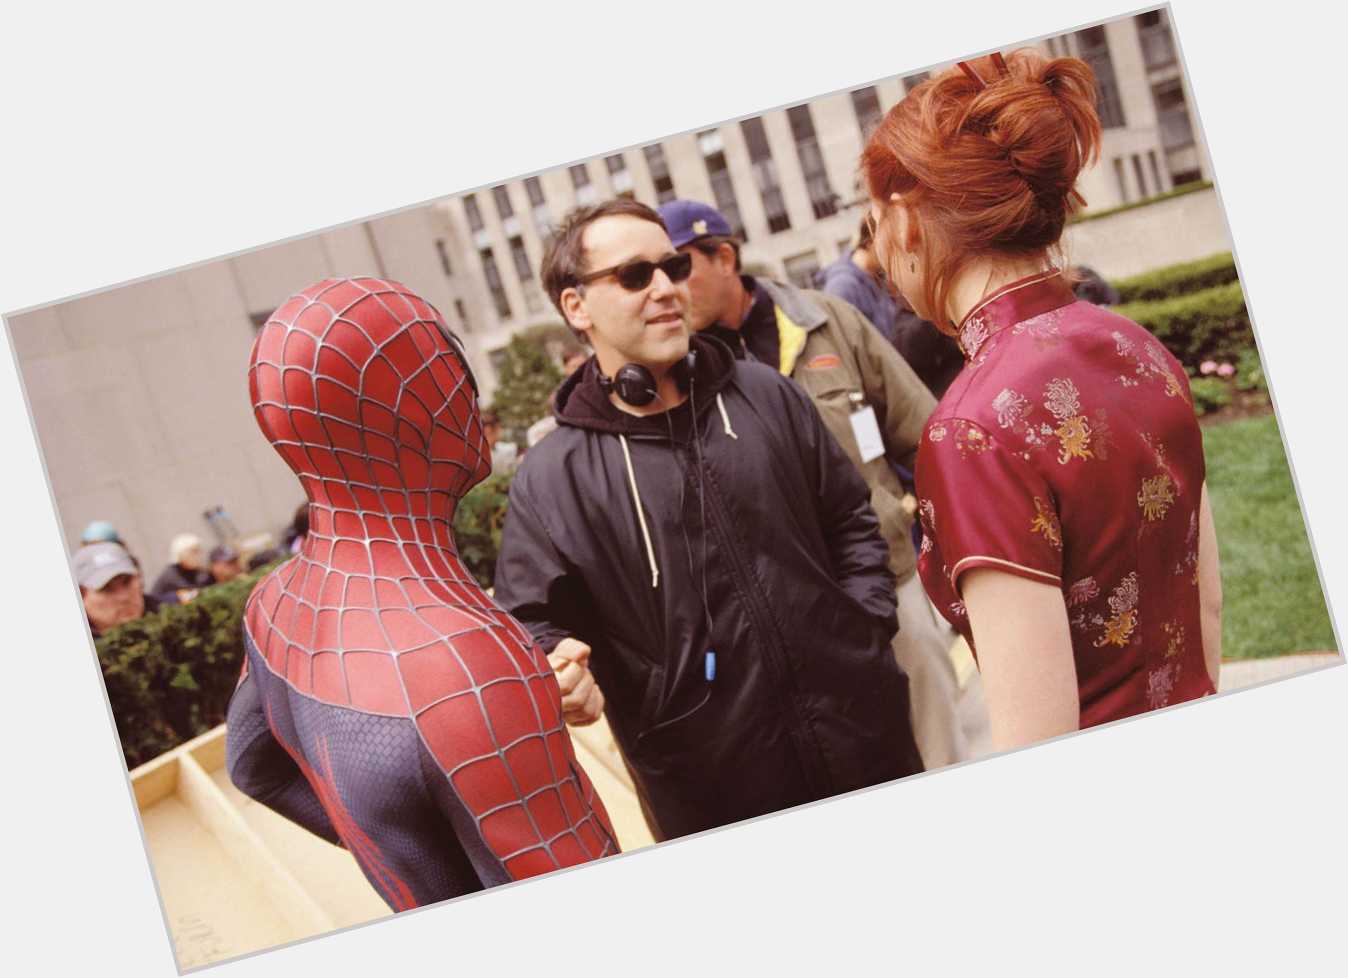 Happy birthday to the legendary Sam raimi

Director of my favourite spider-man films have a great day 